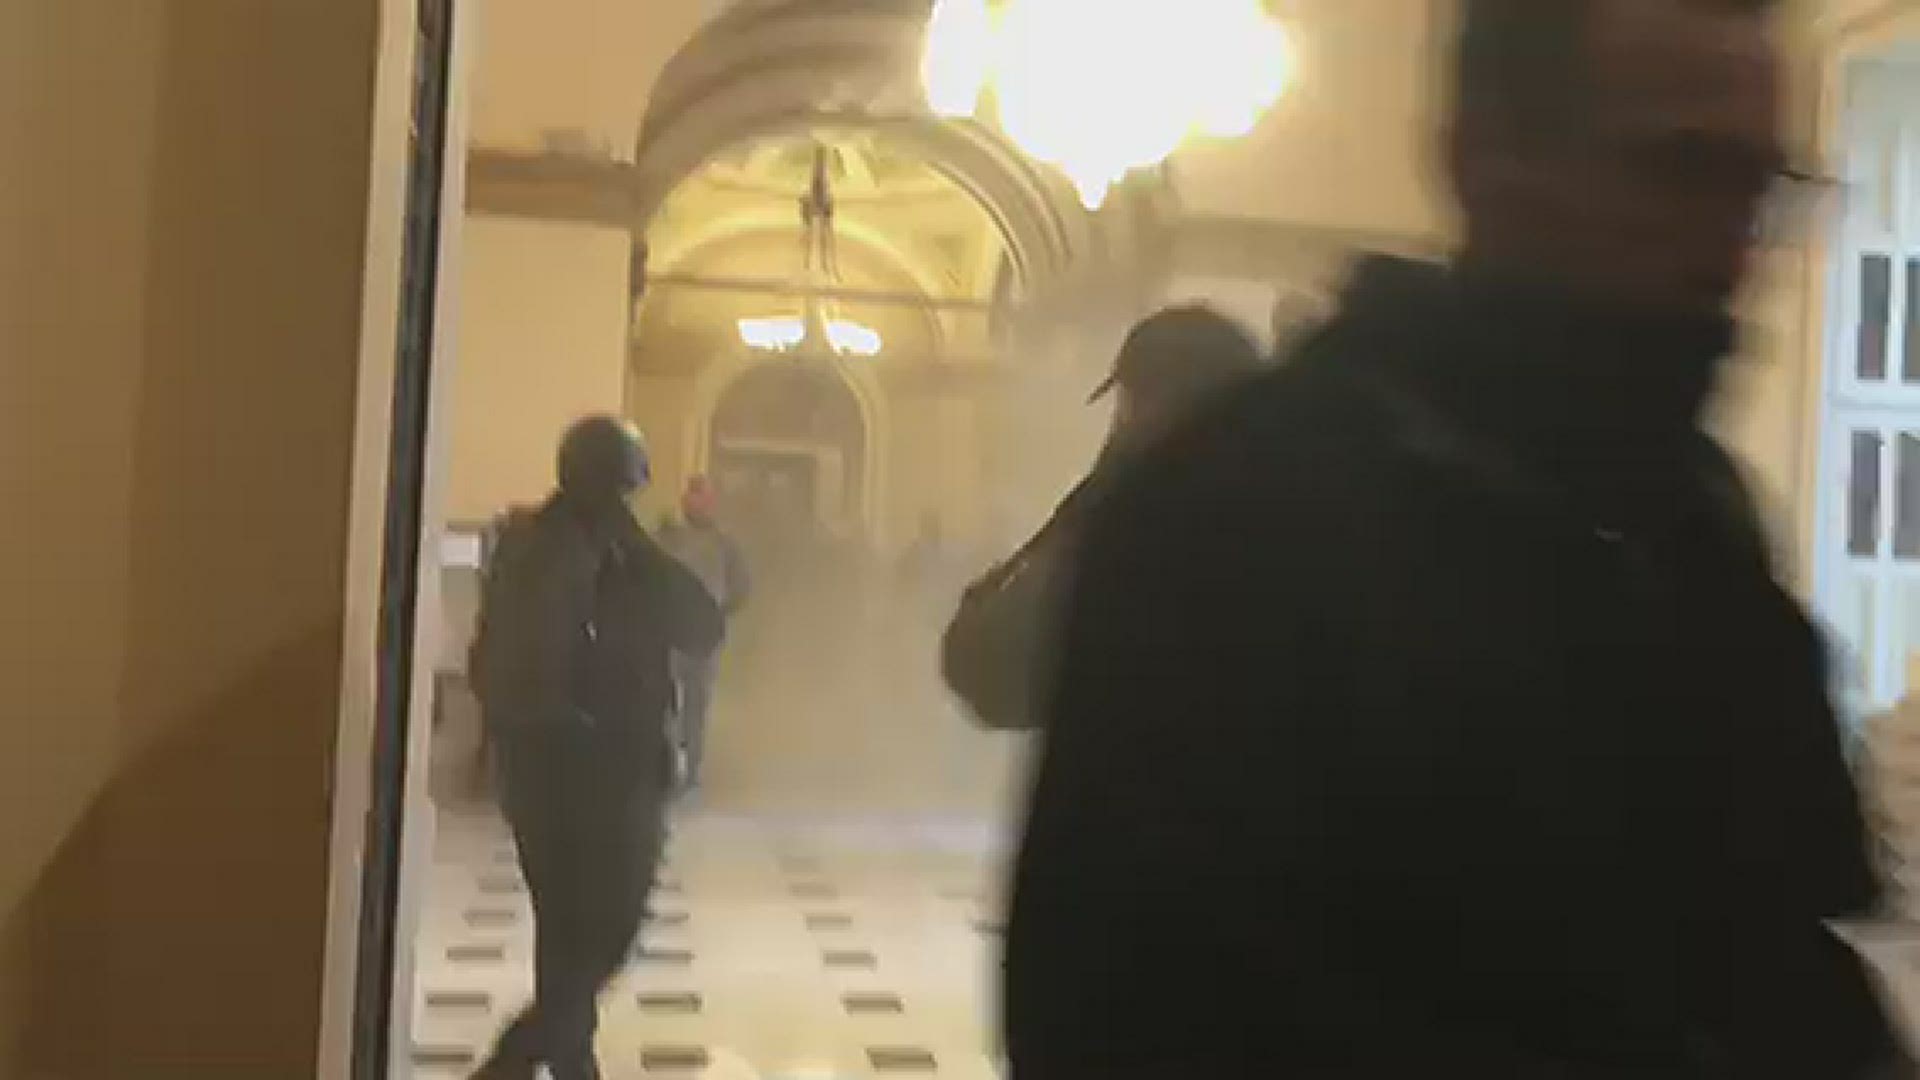 Insurrectionists were heard chanting "our house" as they coughed with smoke filling the air.